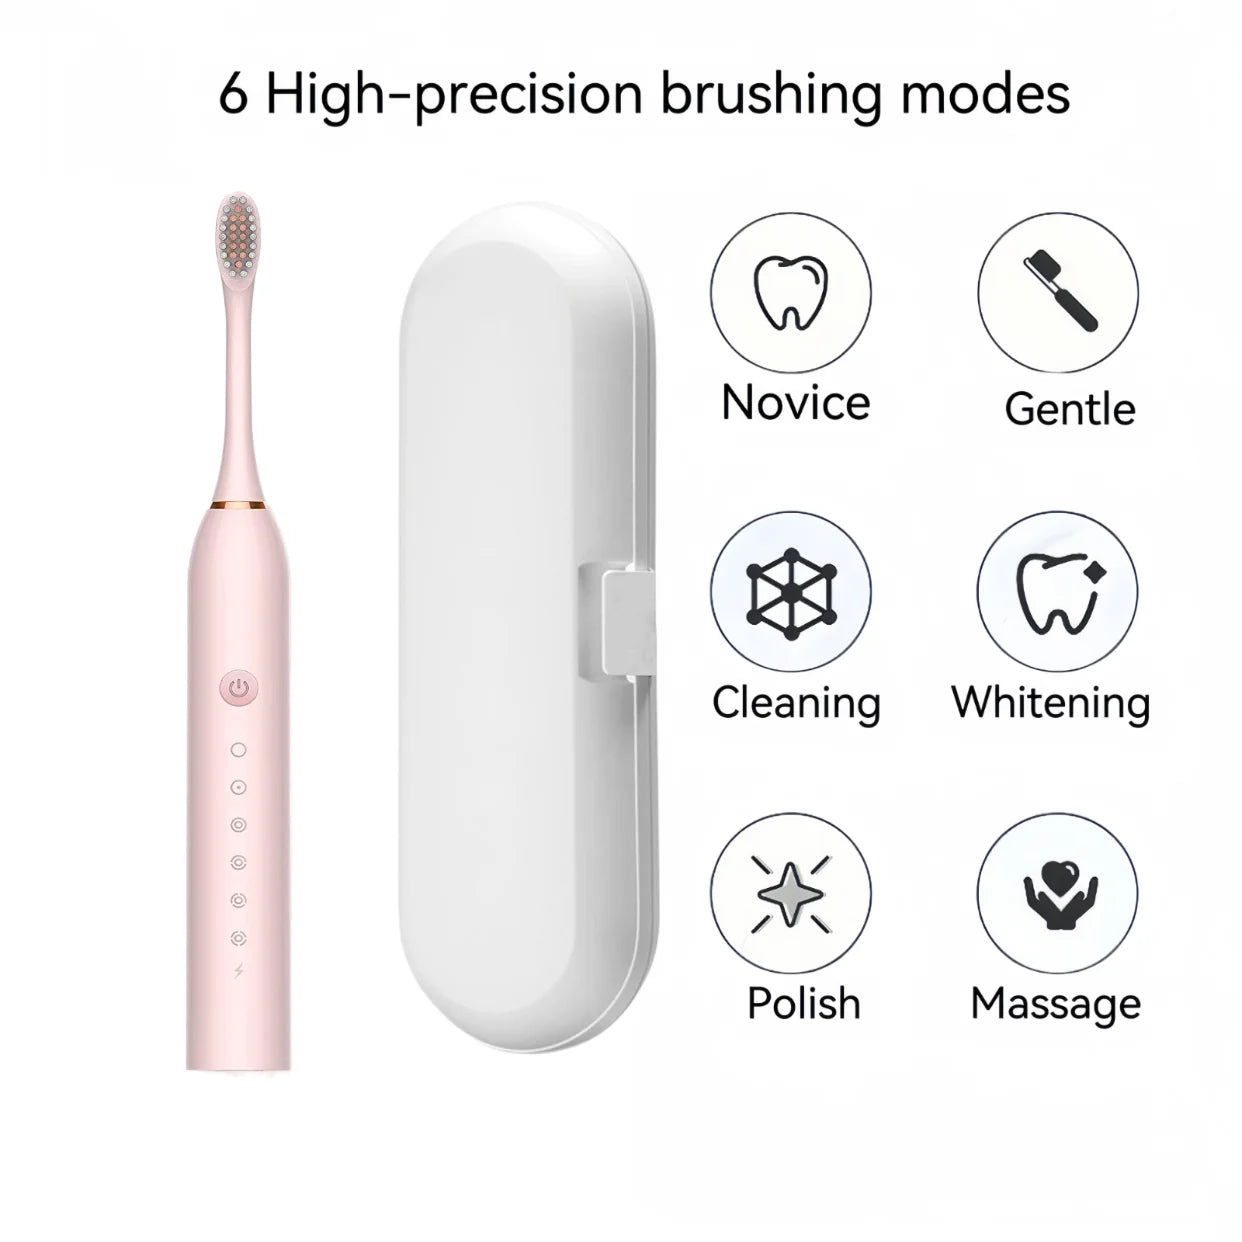 Electric Toothbrush Set with 8 Brush Heads & Travel Case